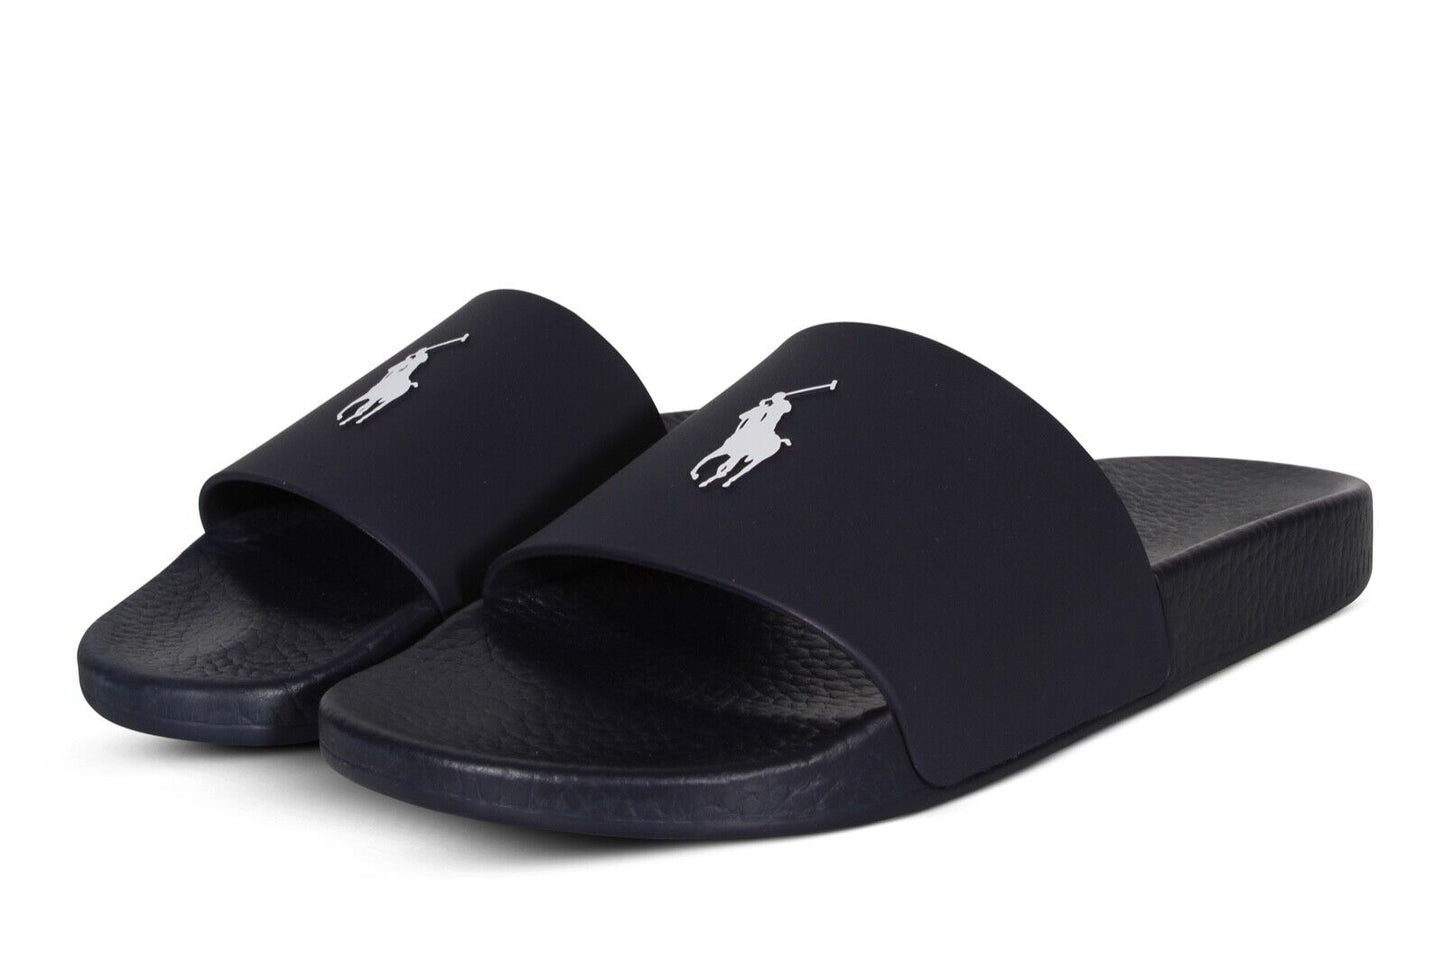 Polo Ralph Lauren Signature Pony Slide in Navy Blue and White 809852071010